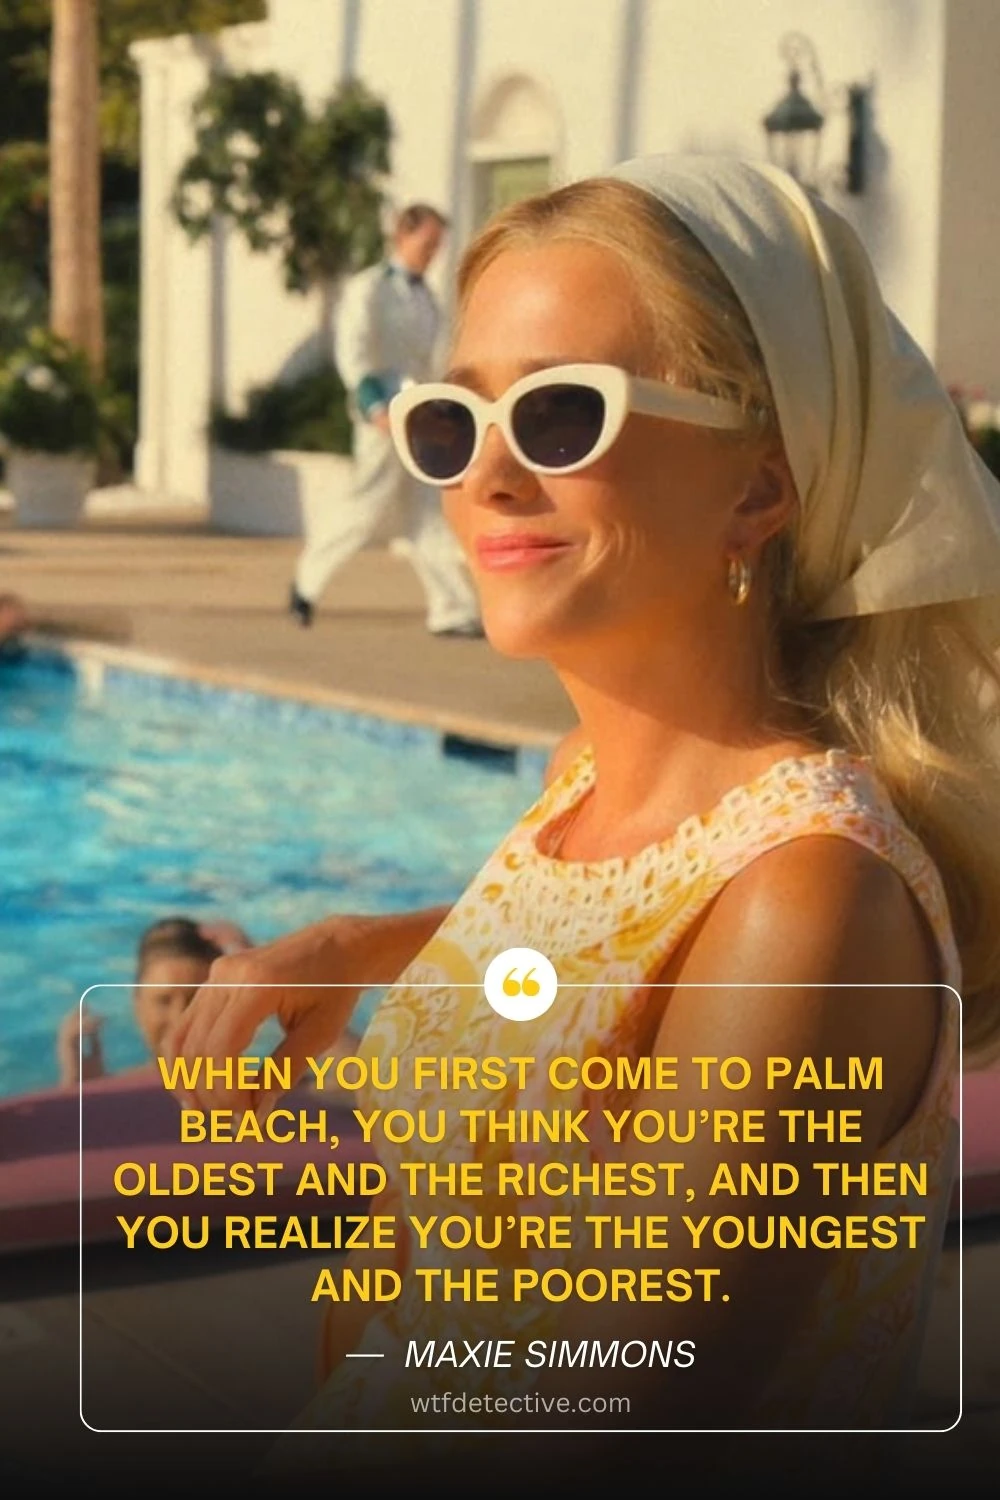 Palm Beach quotes, oldest and the richest quote, you’re the youngest and the poorest quote, Maxine Simmons quote, kristen wiig Quotes from Palm Royale